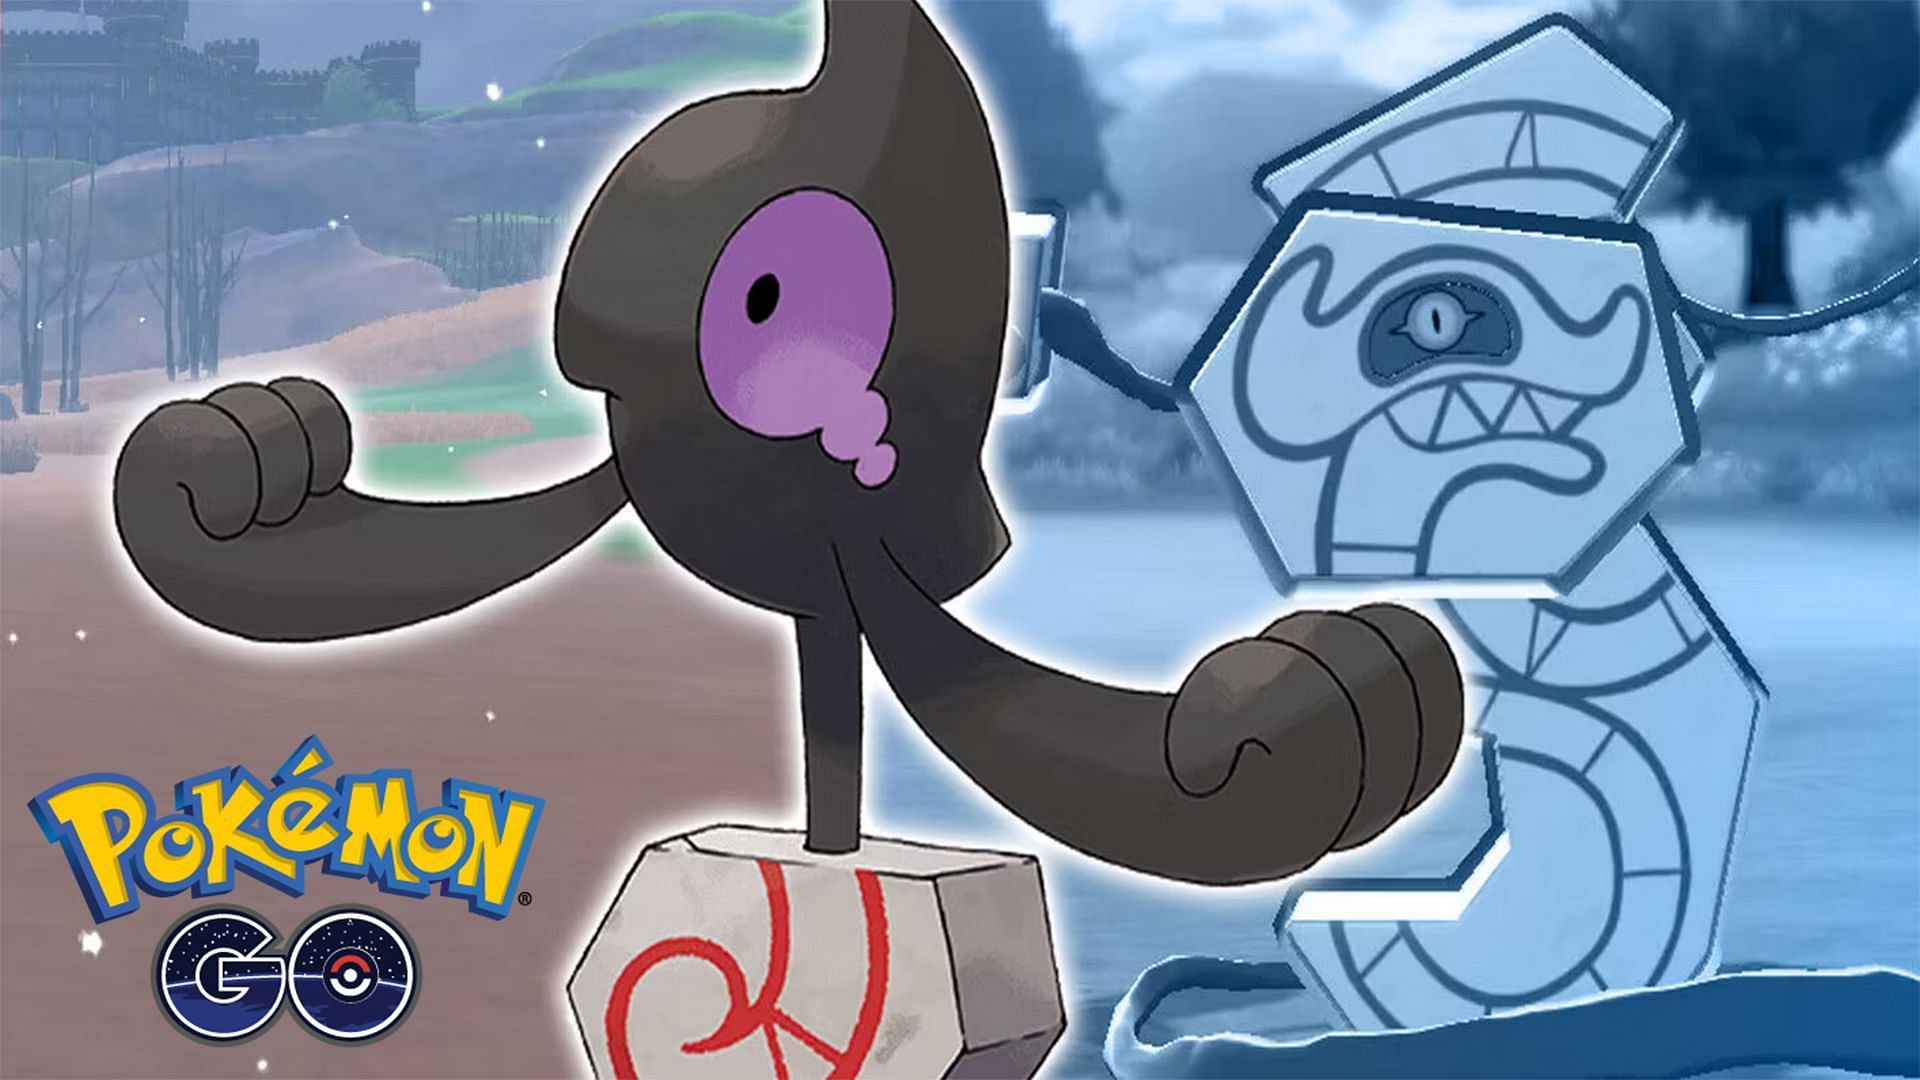 Galarian Yamask is coming this Haloween 2022 in Pokemon GO (Image via Niantic)